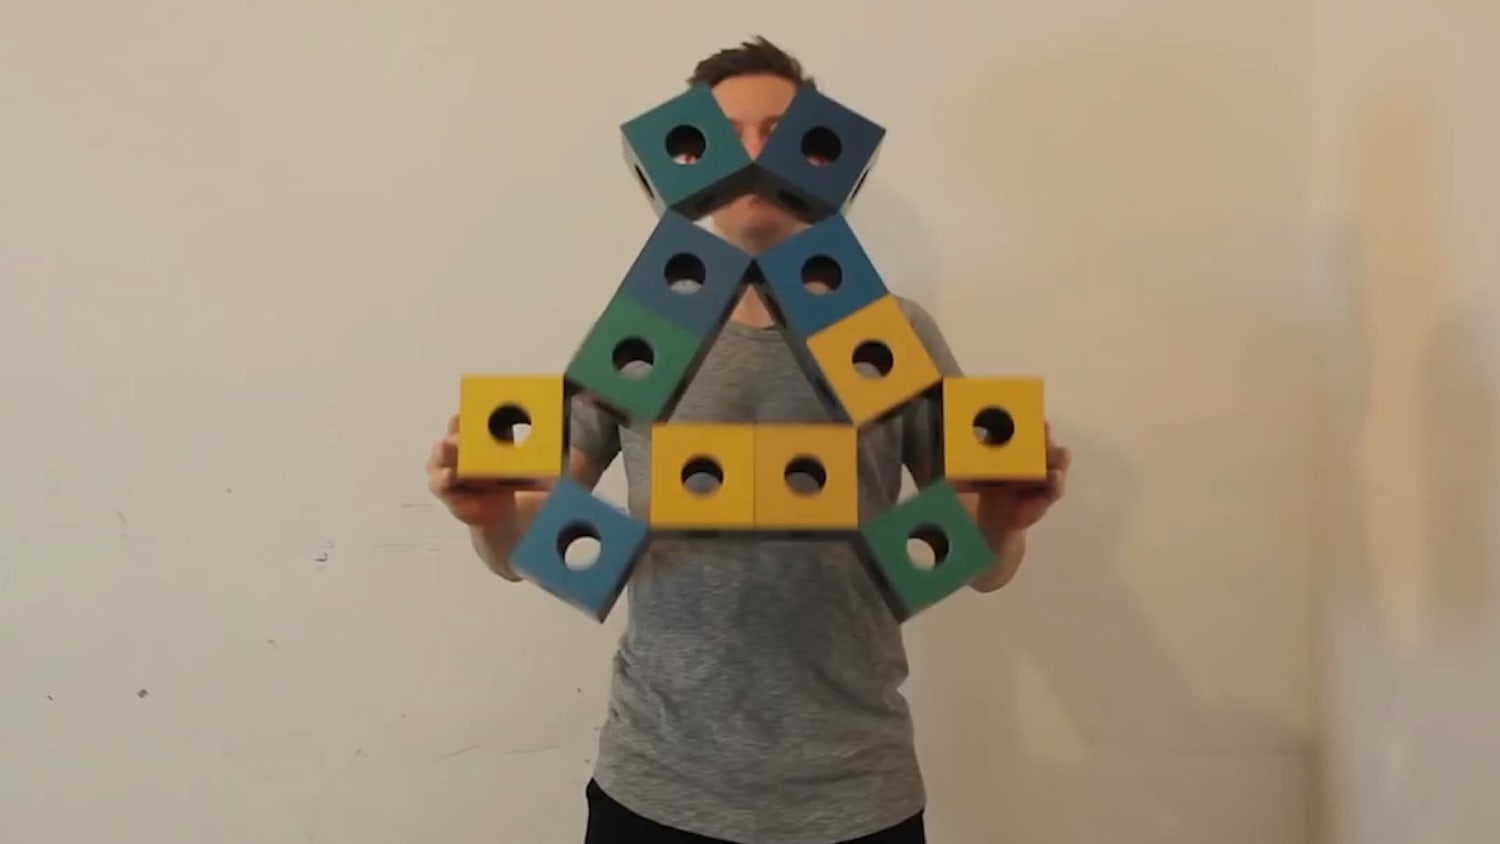 These are "Abercubes" by Erik Aberg. It's a system of cubes that can fold/unfold, transform into interesting shapes and create unique movements!